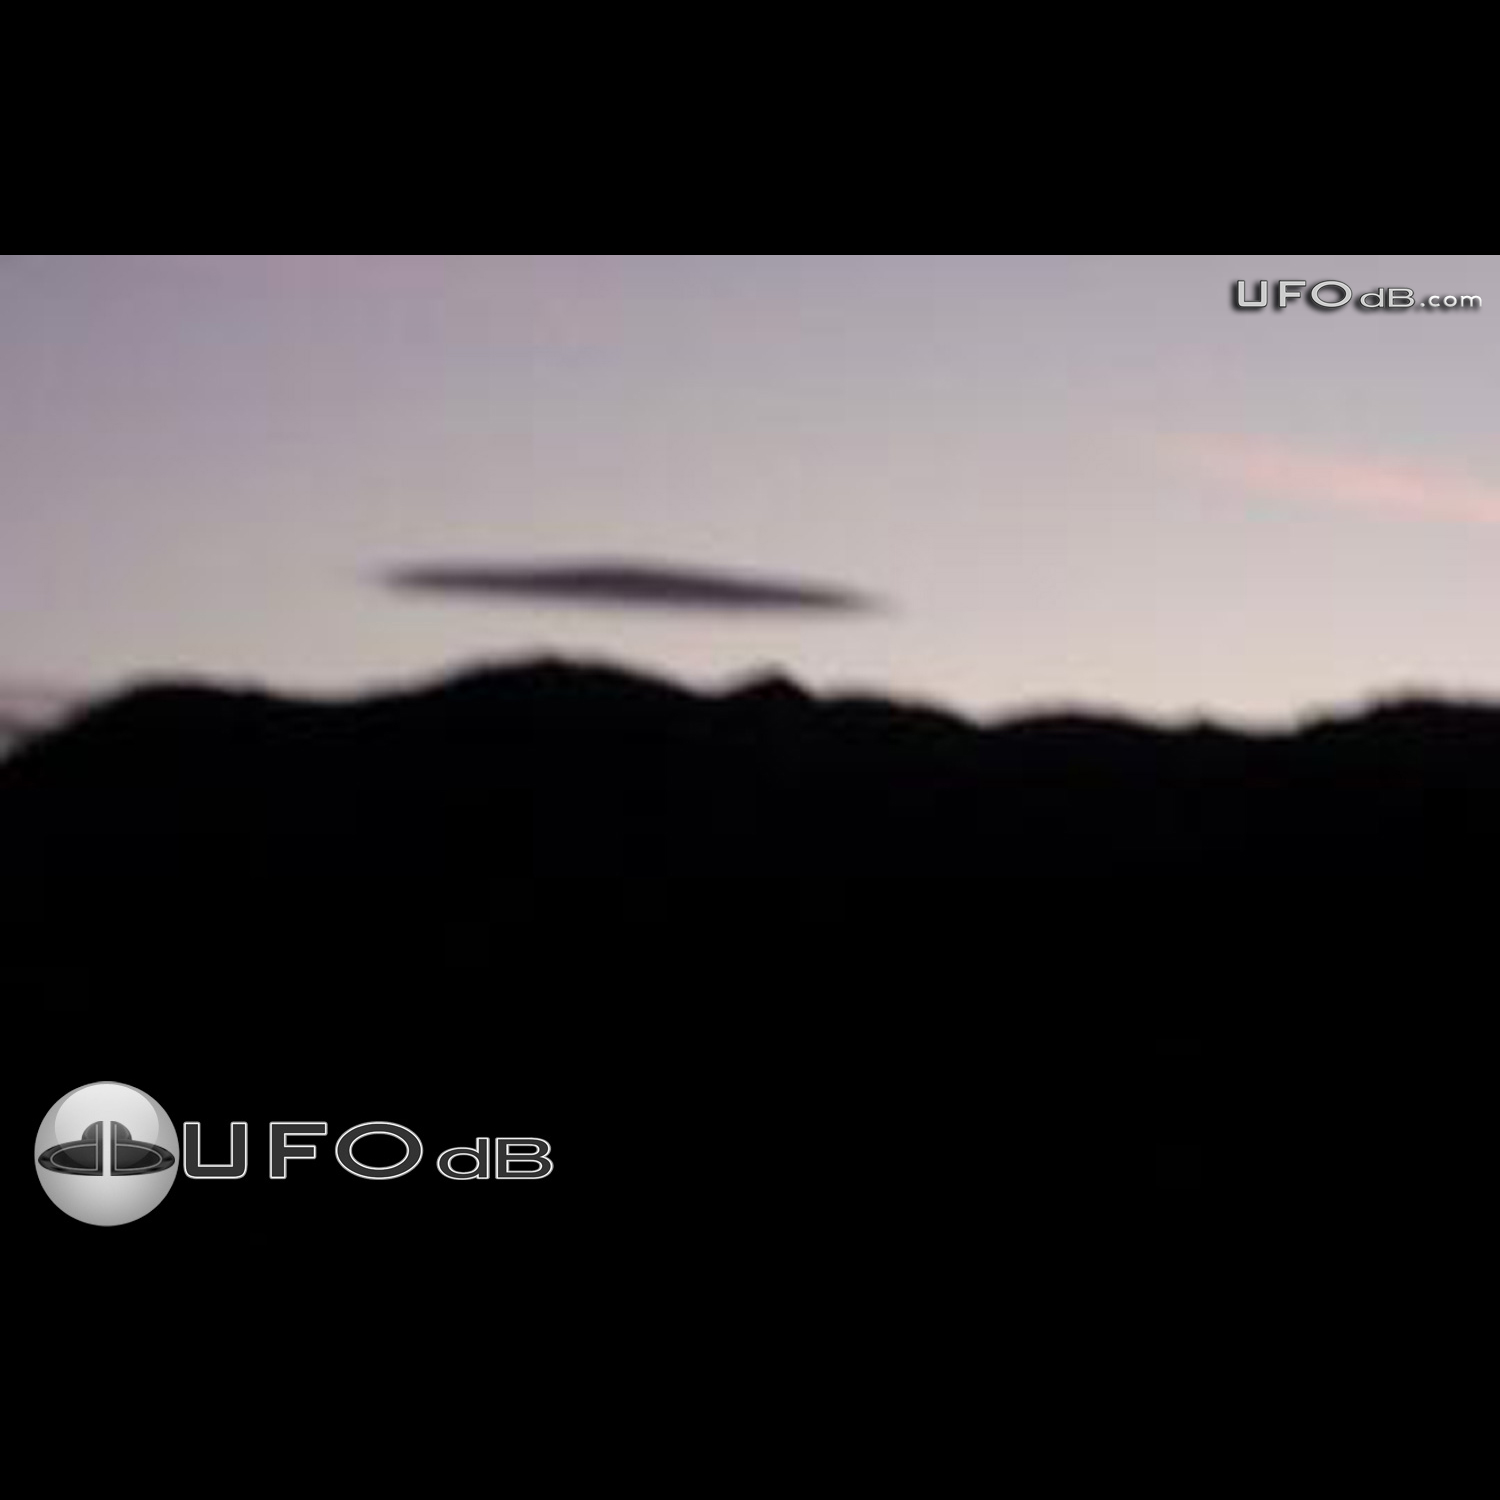 Renowned Aviator shoot a UFO picture in Cachi, Argentina | April 2011 UFO Picture #283-1